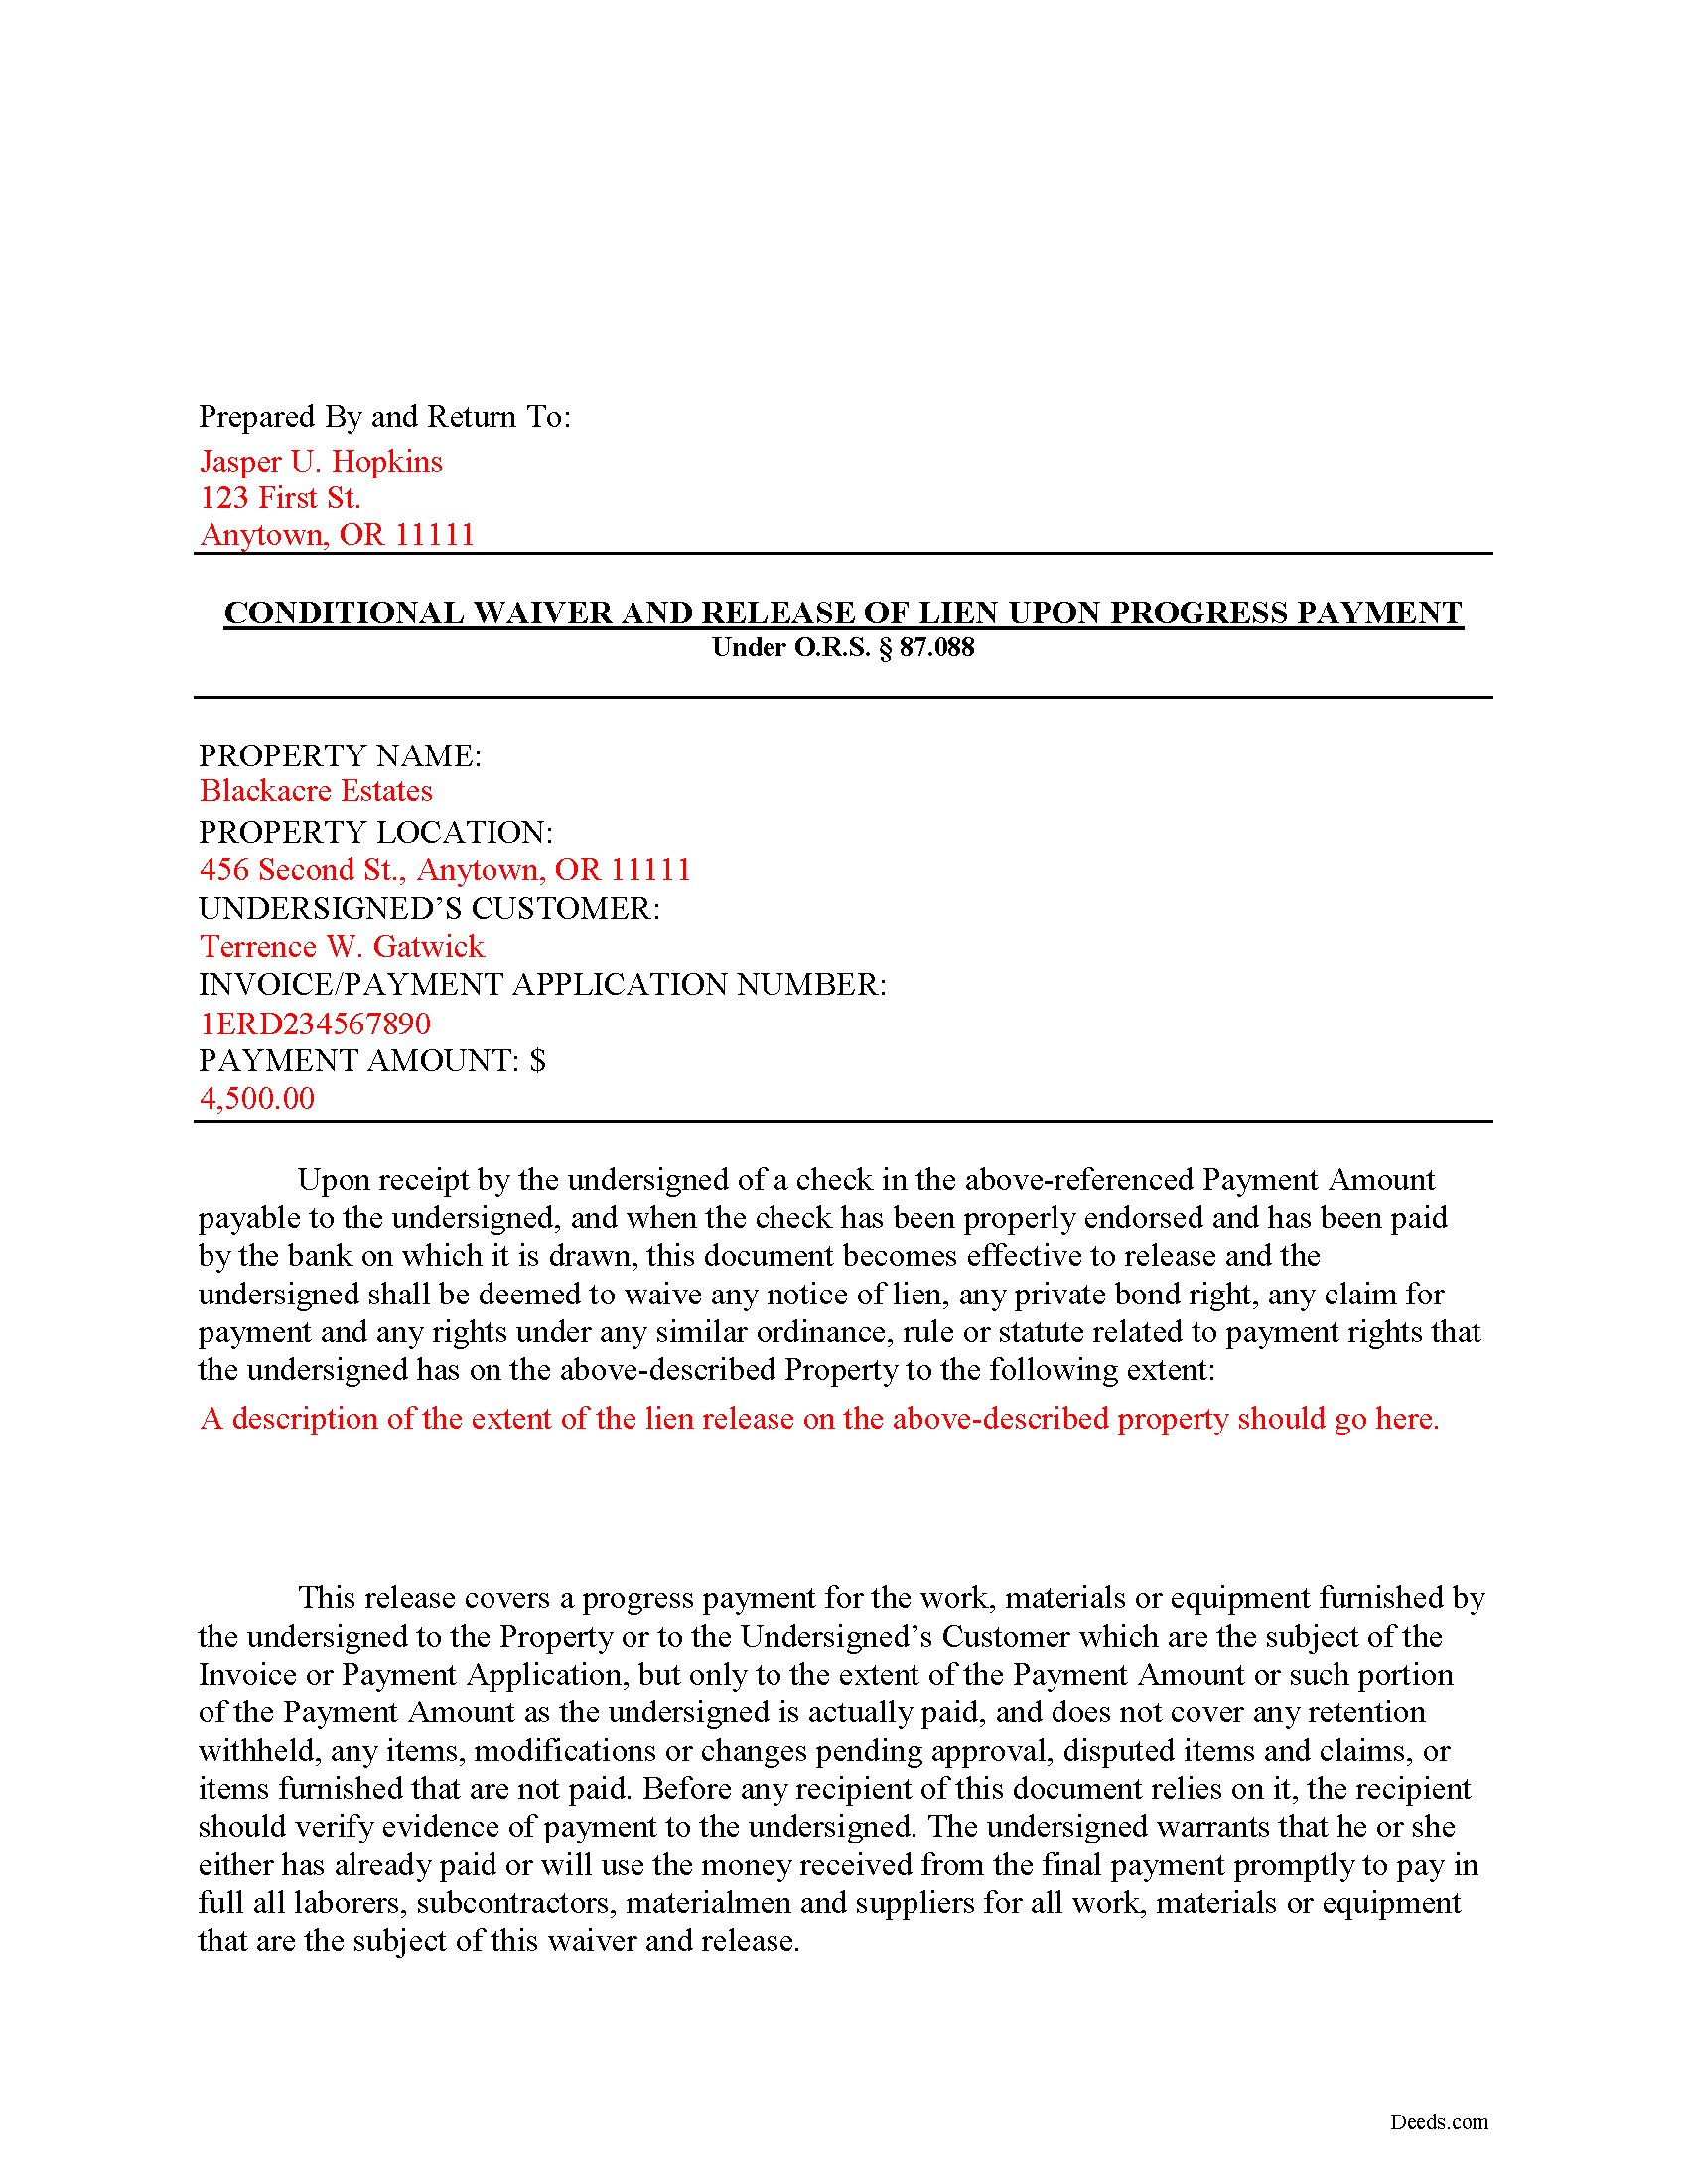 Completed Example of the Conditional Lien Waiver on Progess Payment Document